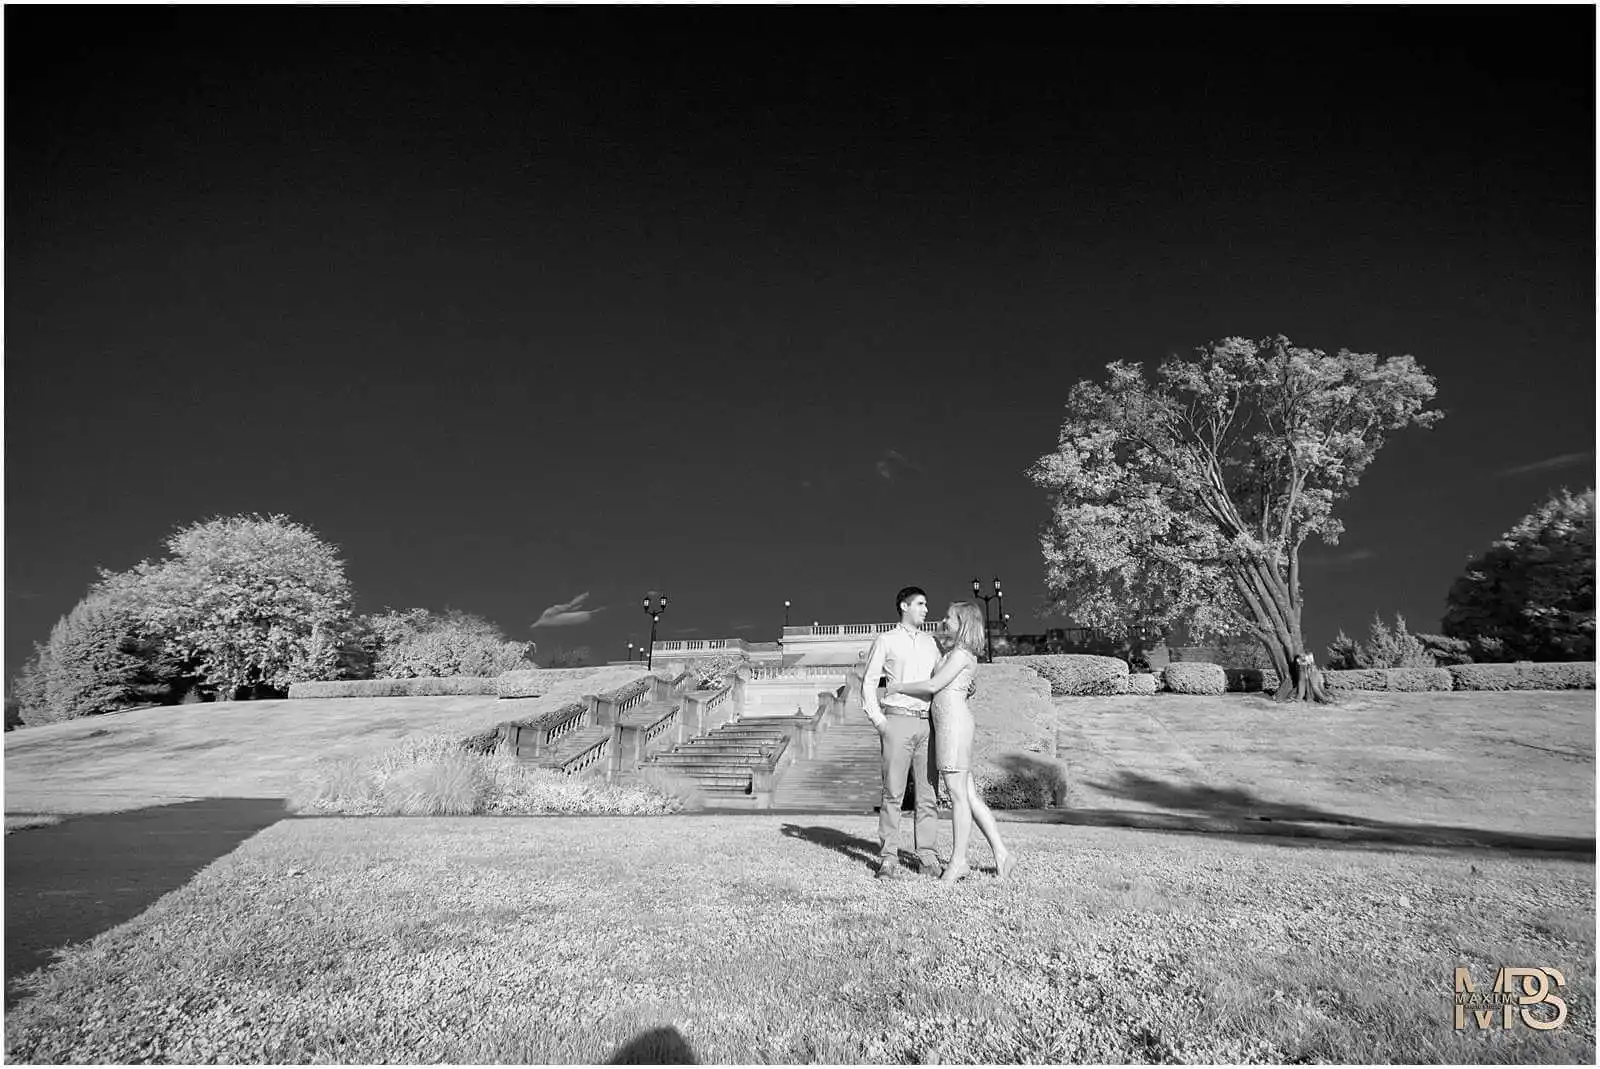 Couple posing in a park with infrared photography effect.